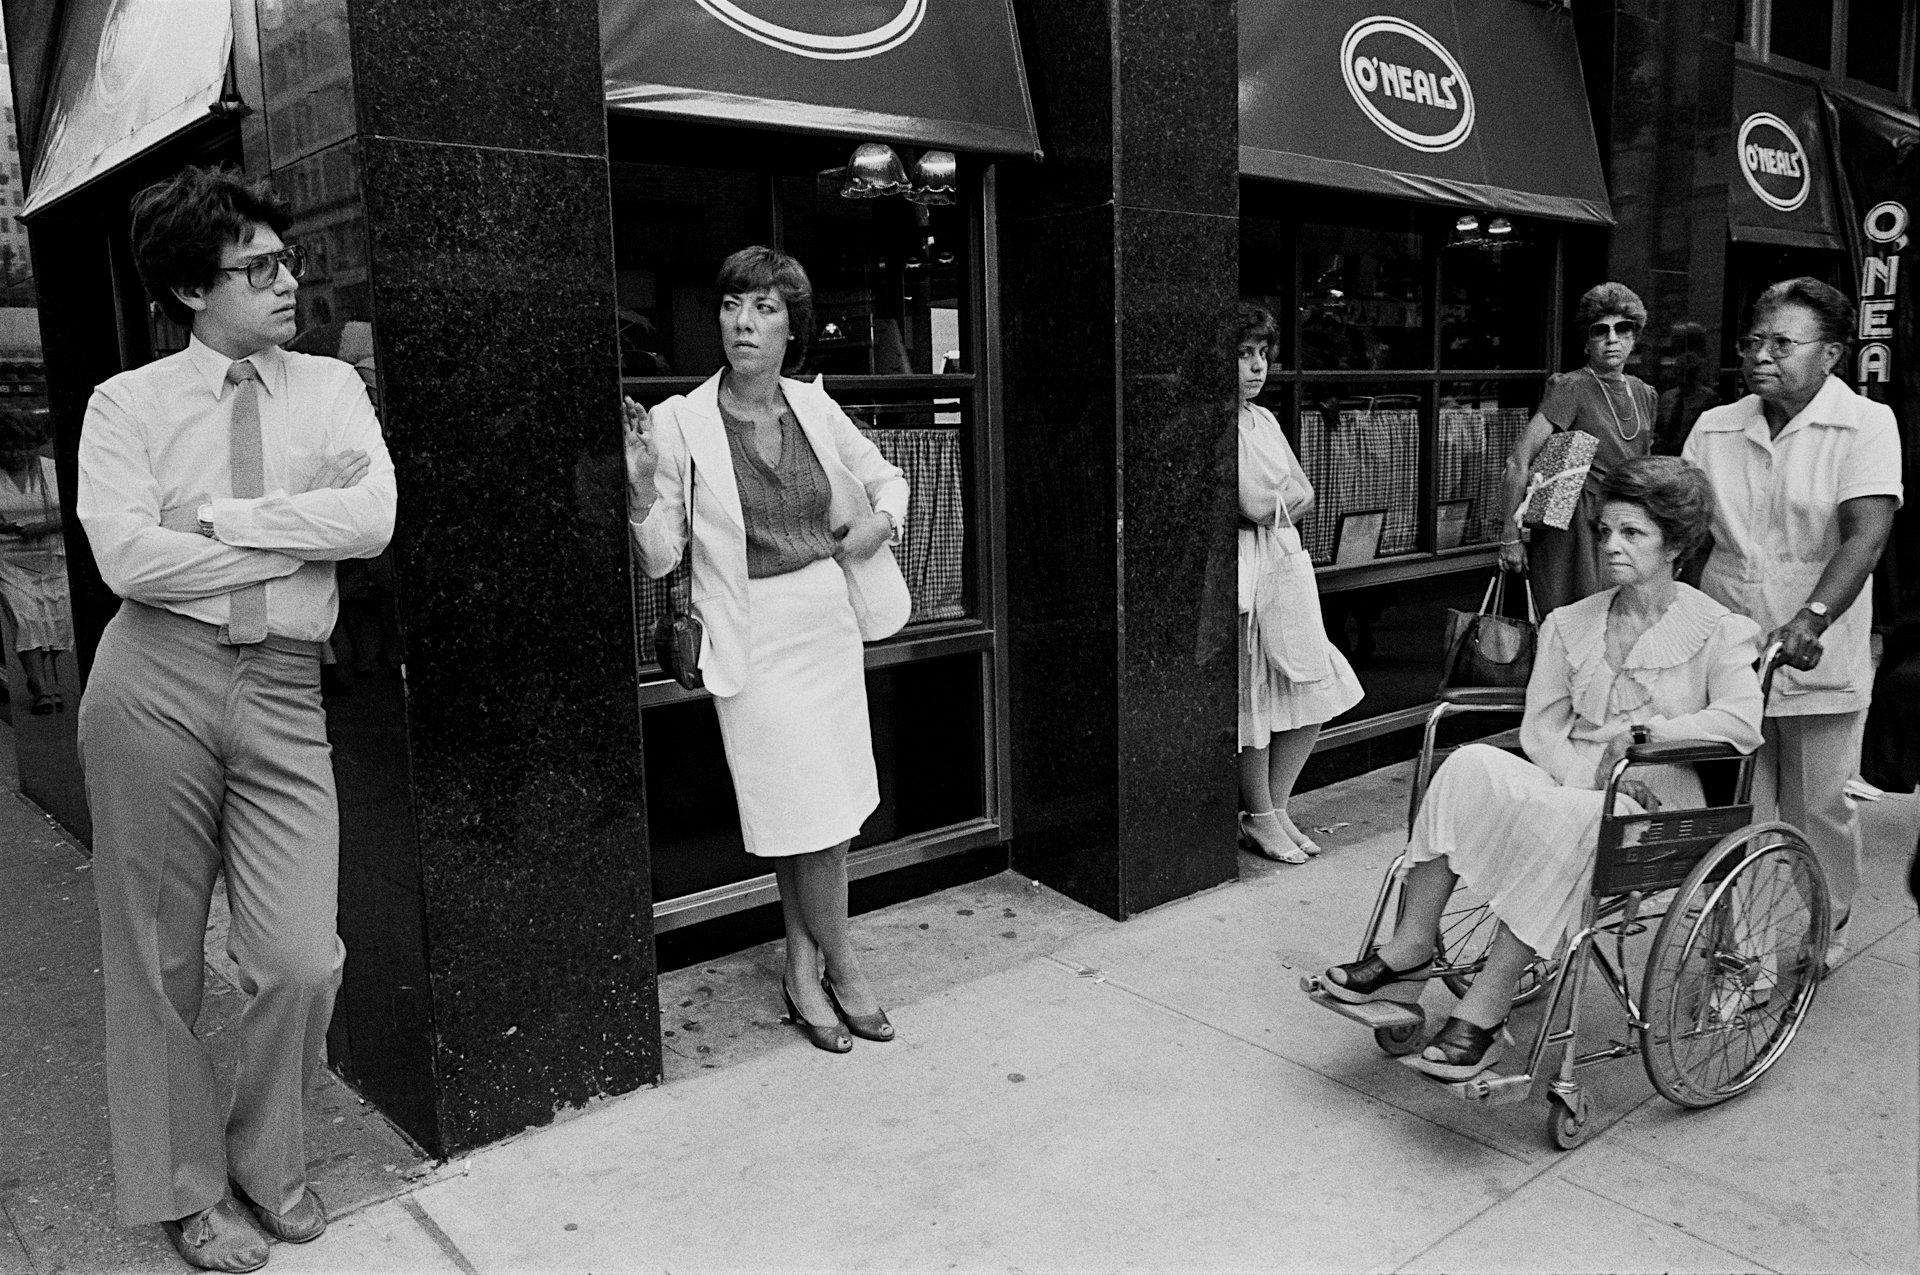 6th Ave., and 57th St., NYC, 1981